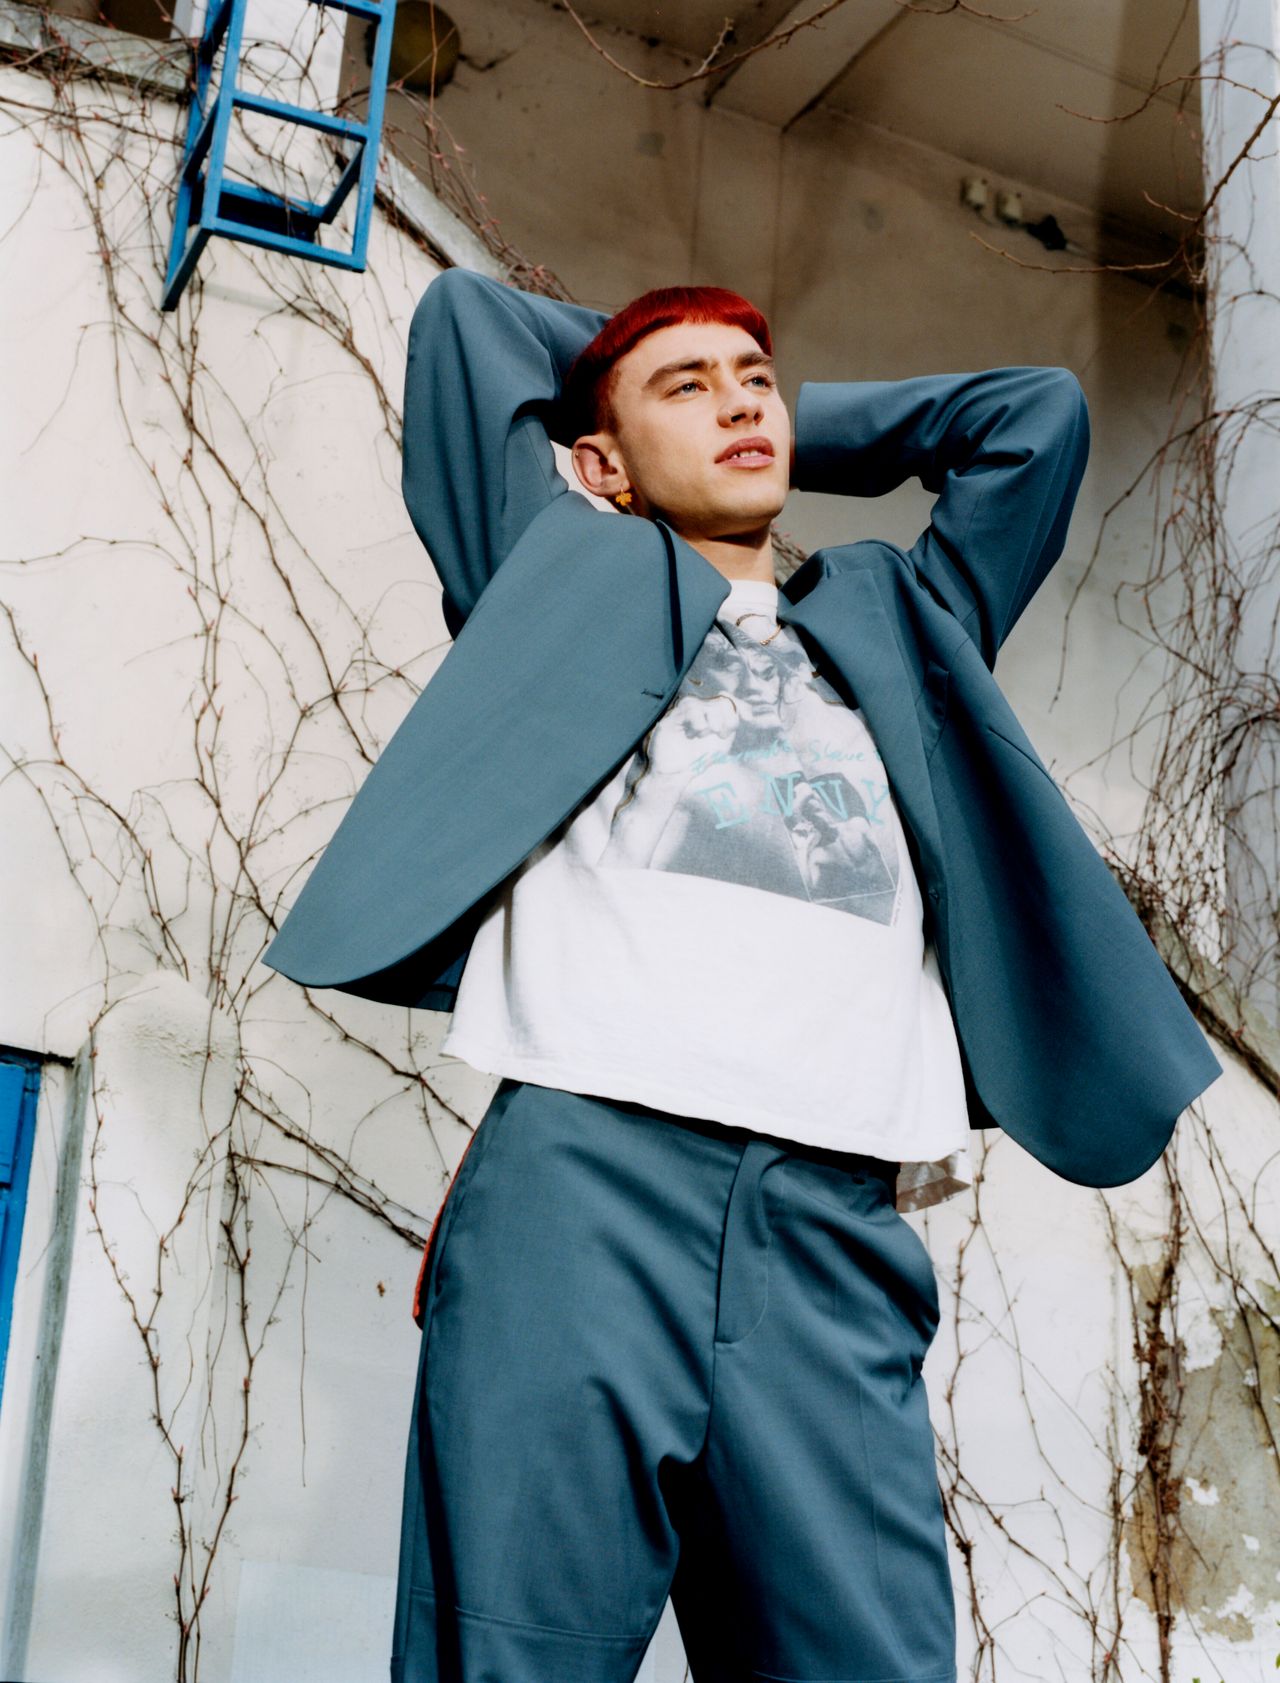 Years & Years star Olly Alexander discusses his coping strategies under lockdown, and how the coronavirus has affected his work 